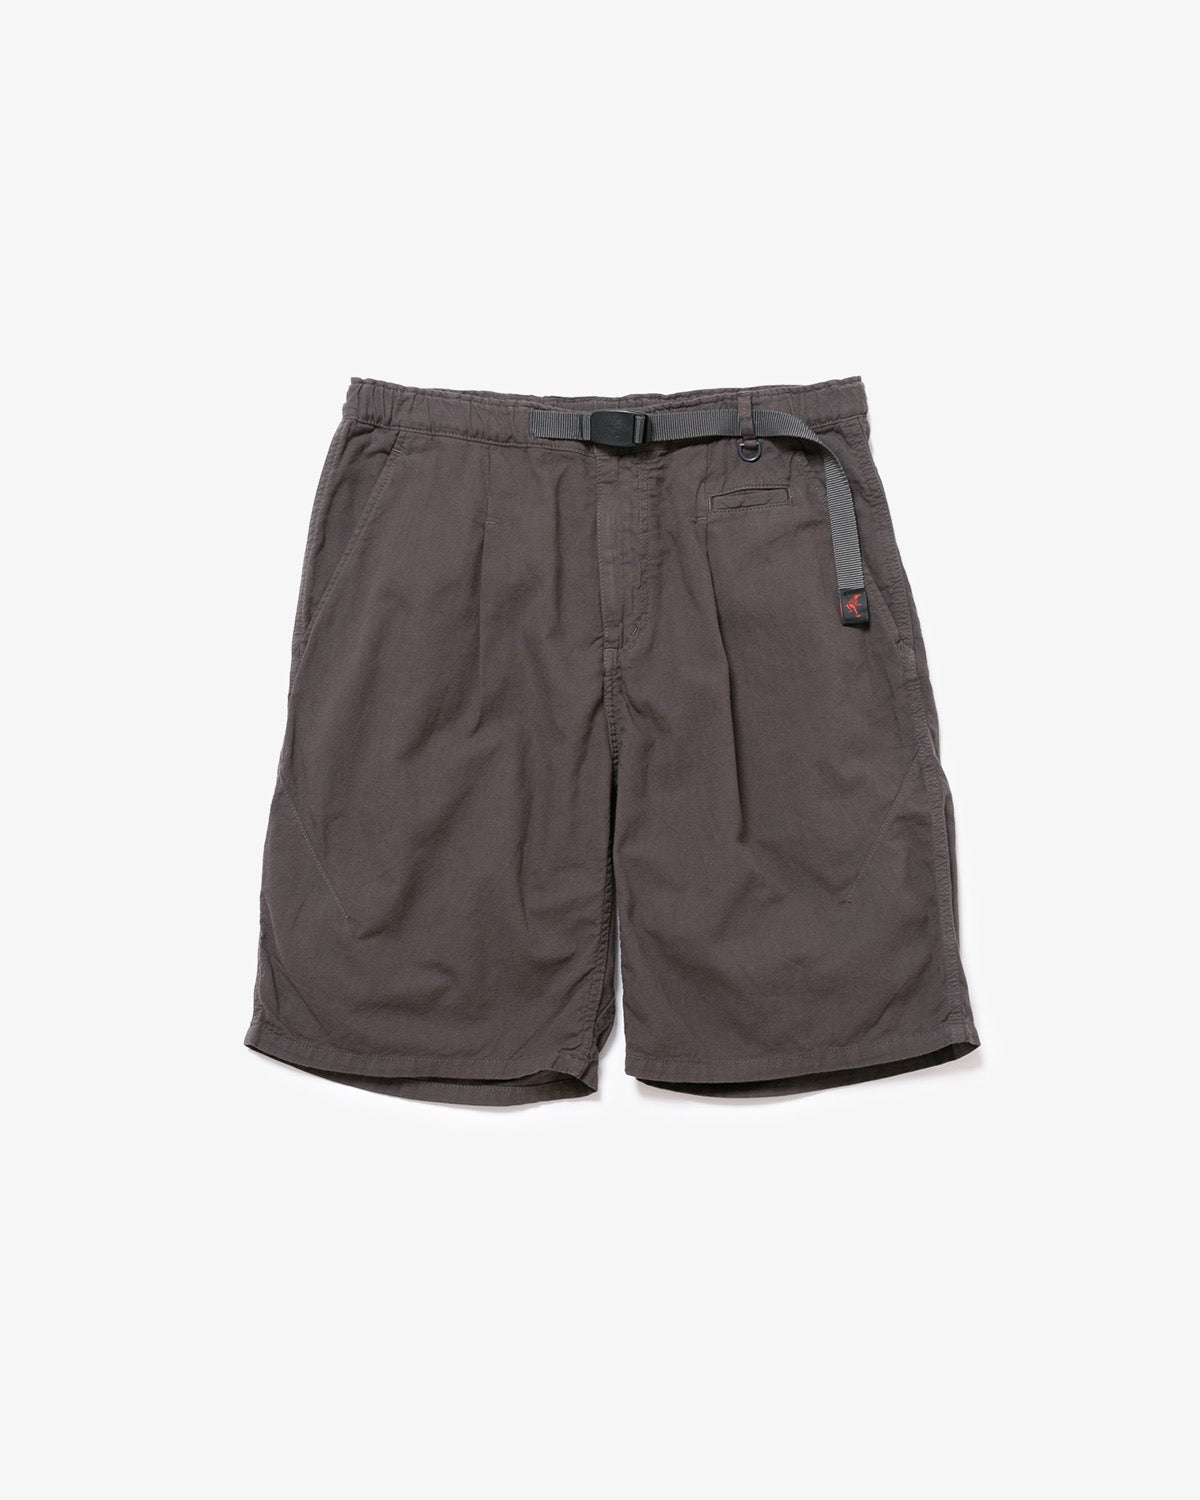 WALKER EASY SHORTS COTTON PAPER VIERA OVERDYED by GRAMICCI